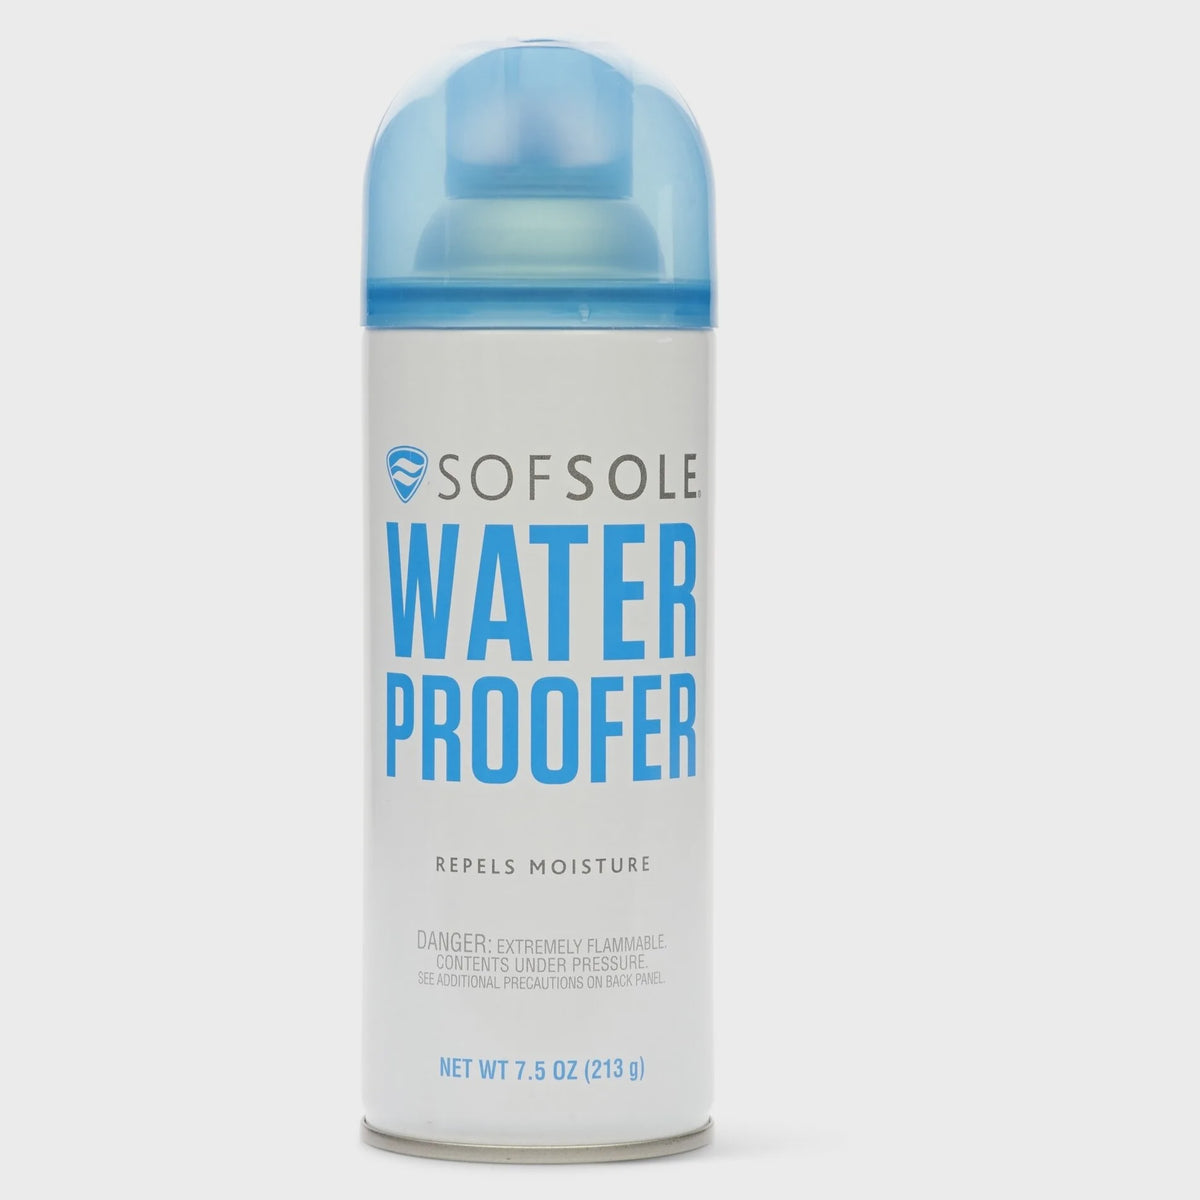 SOFSOLE WATER PROOFER 200ml